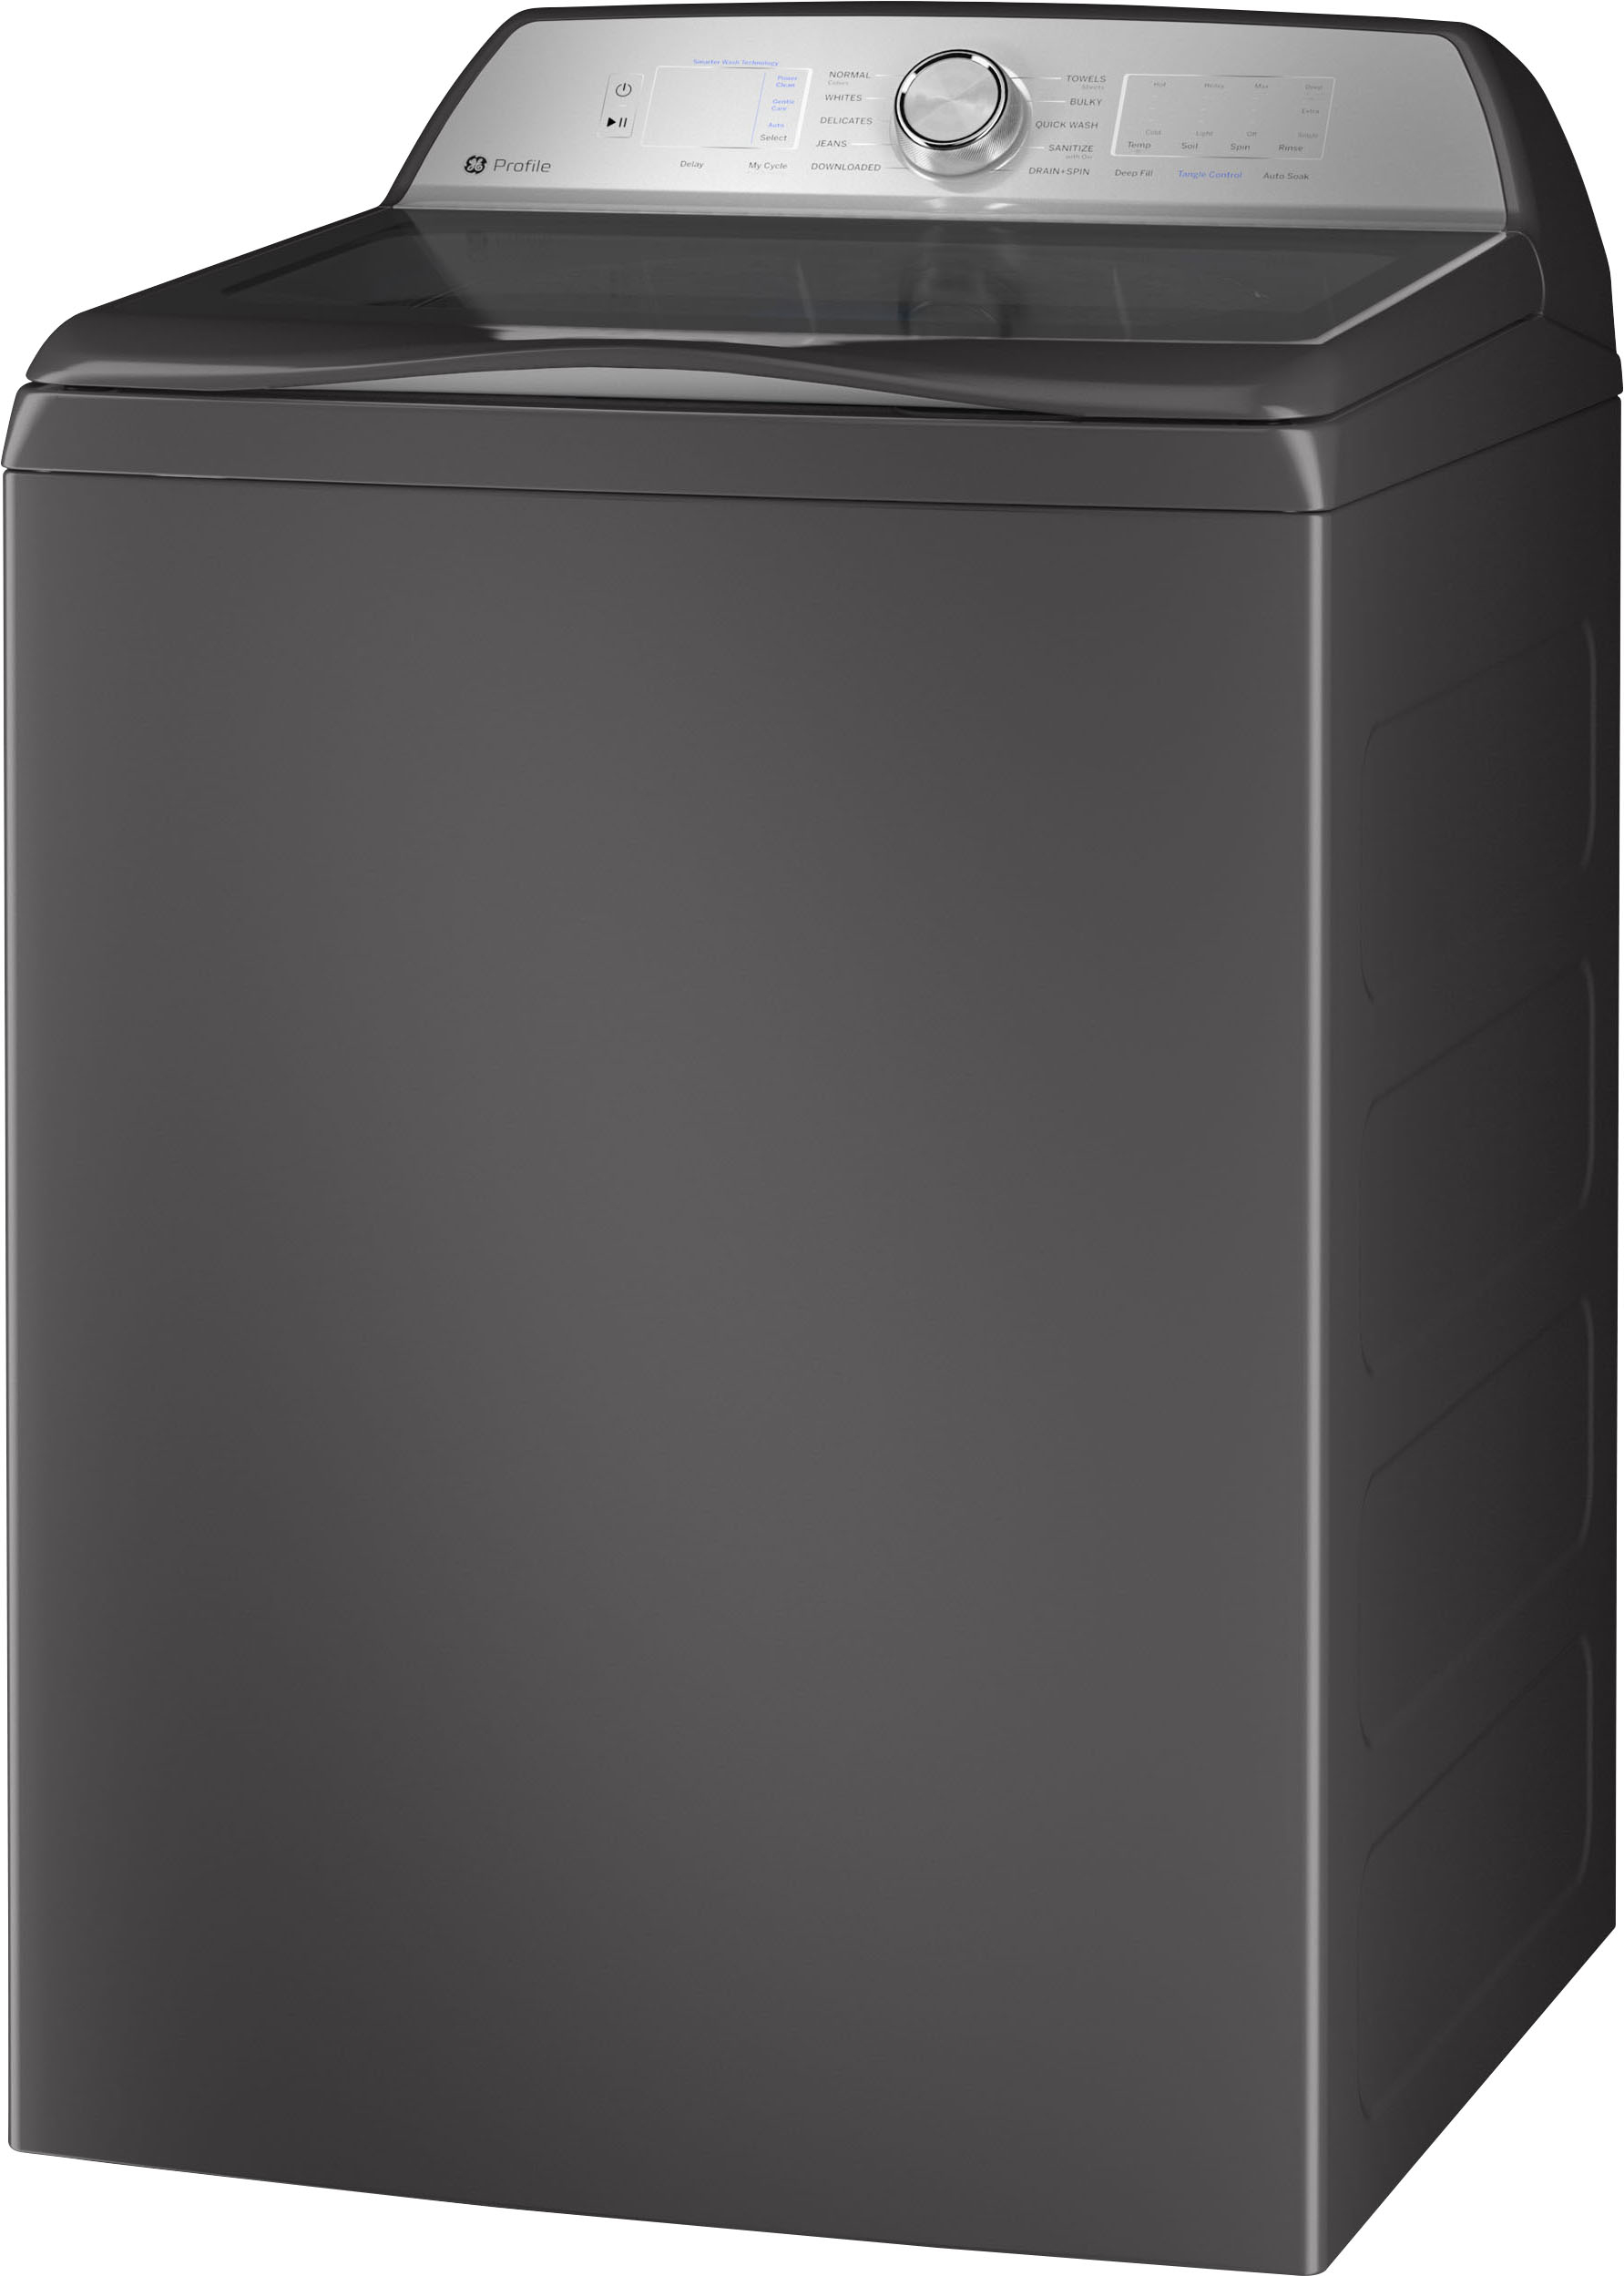 Left View: GE Profile - 5.0 Cu Ft High Efficiency Smart Top Load Washer with Smarter Wash Technology, Easier Reach & Microban Technology - Diamond Gray